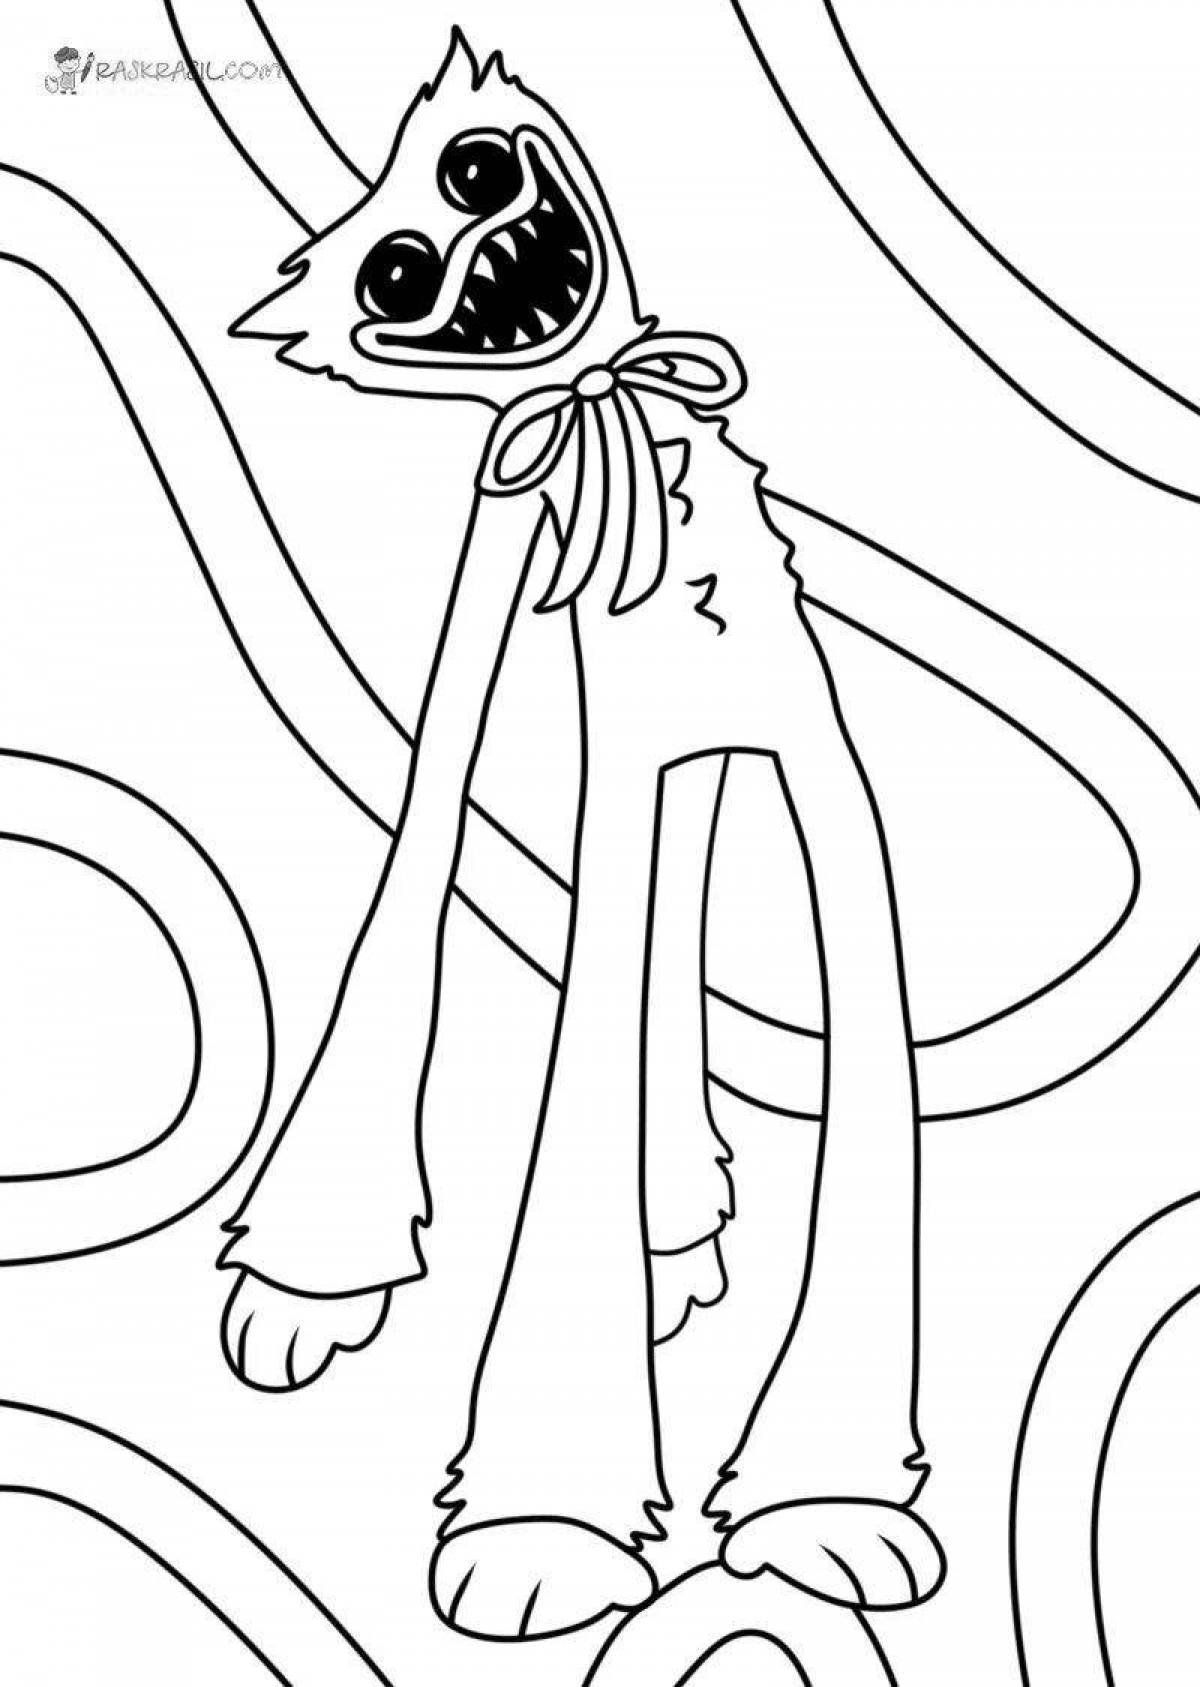 Coloring book shiny mommy with long legs